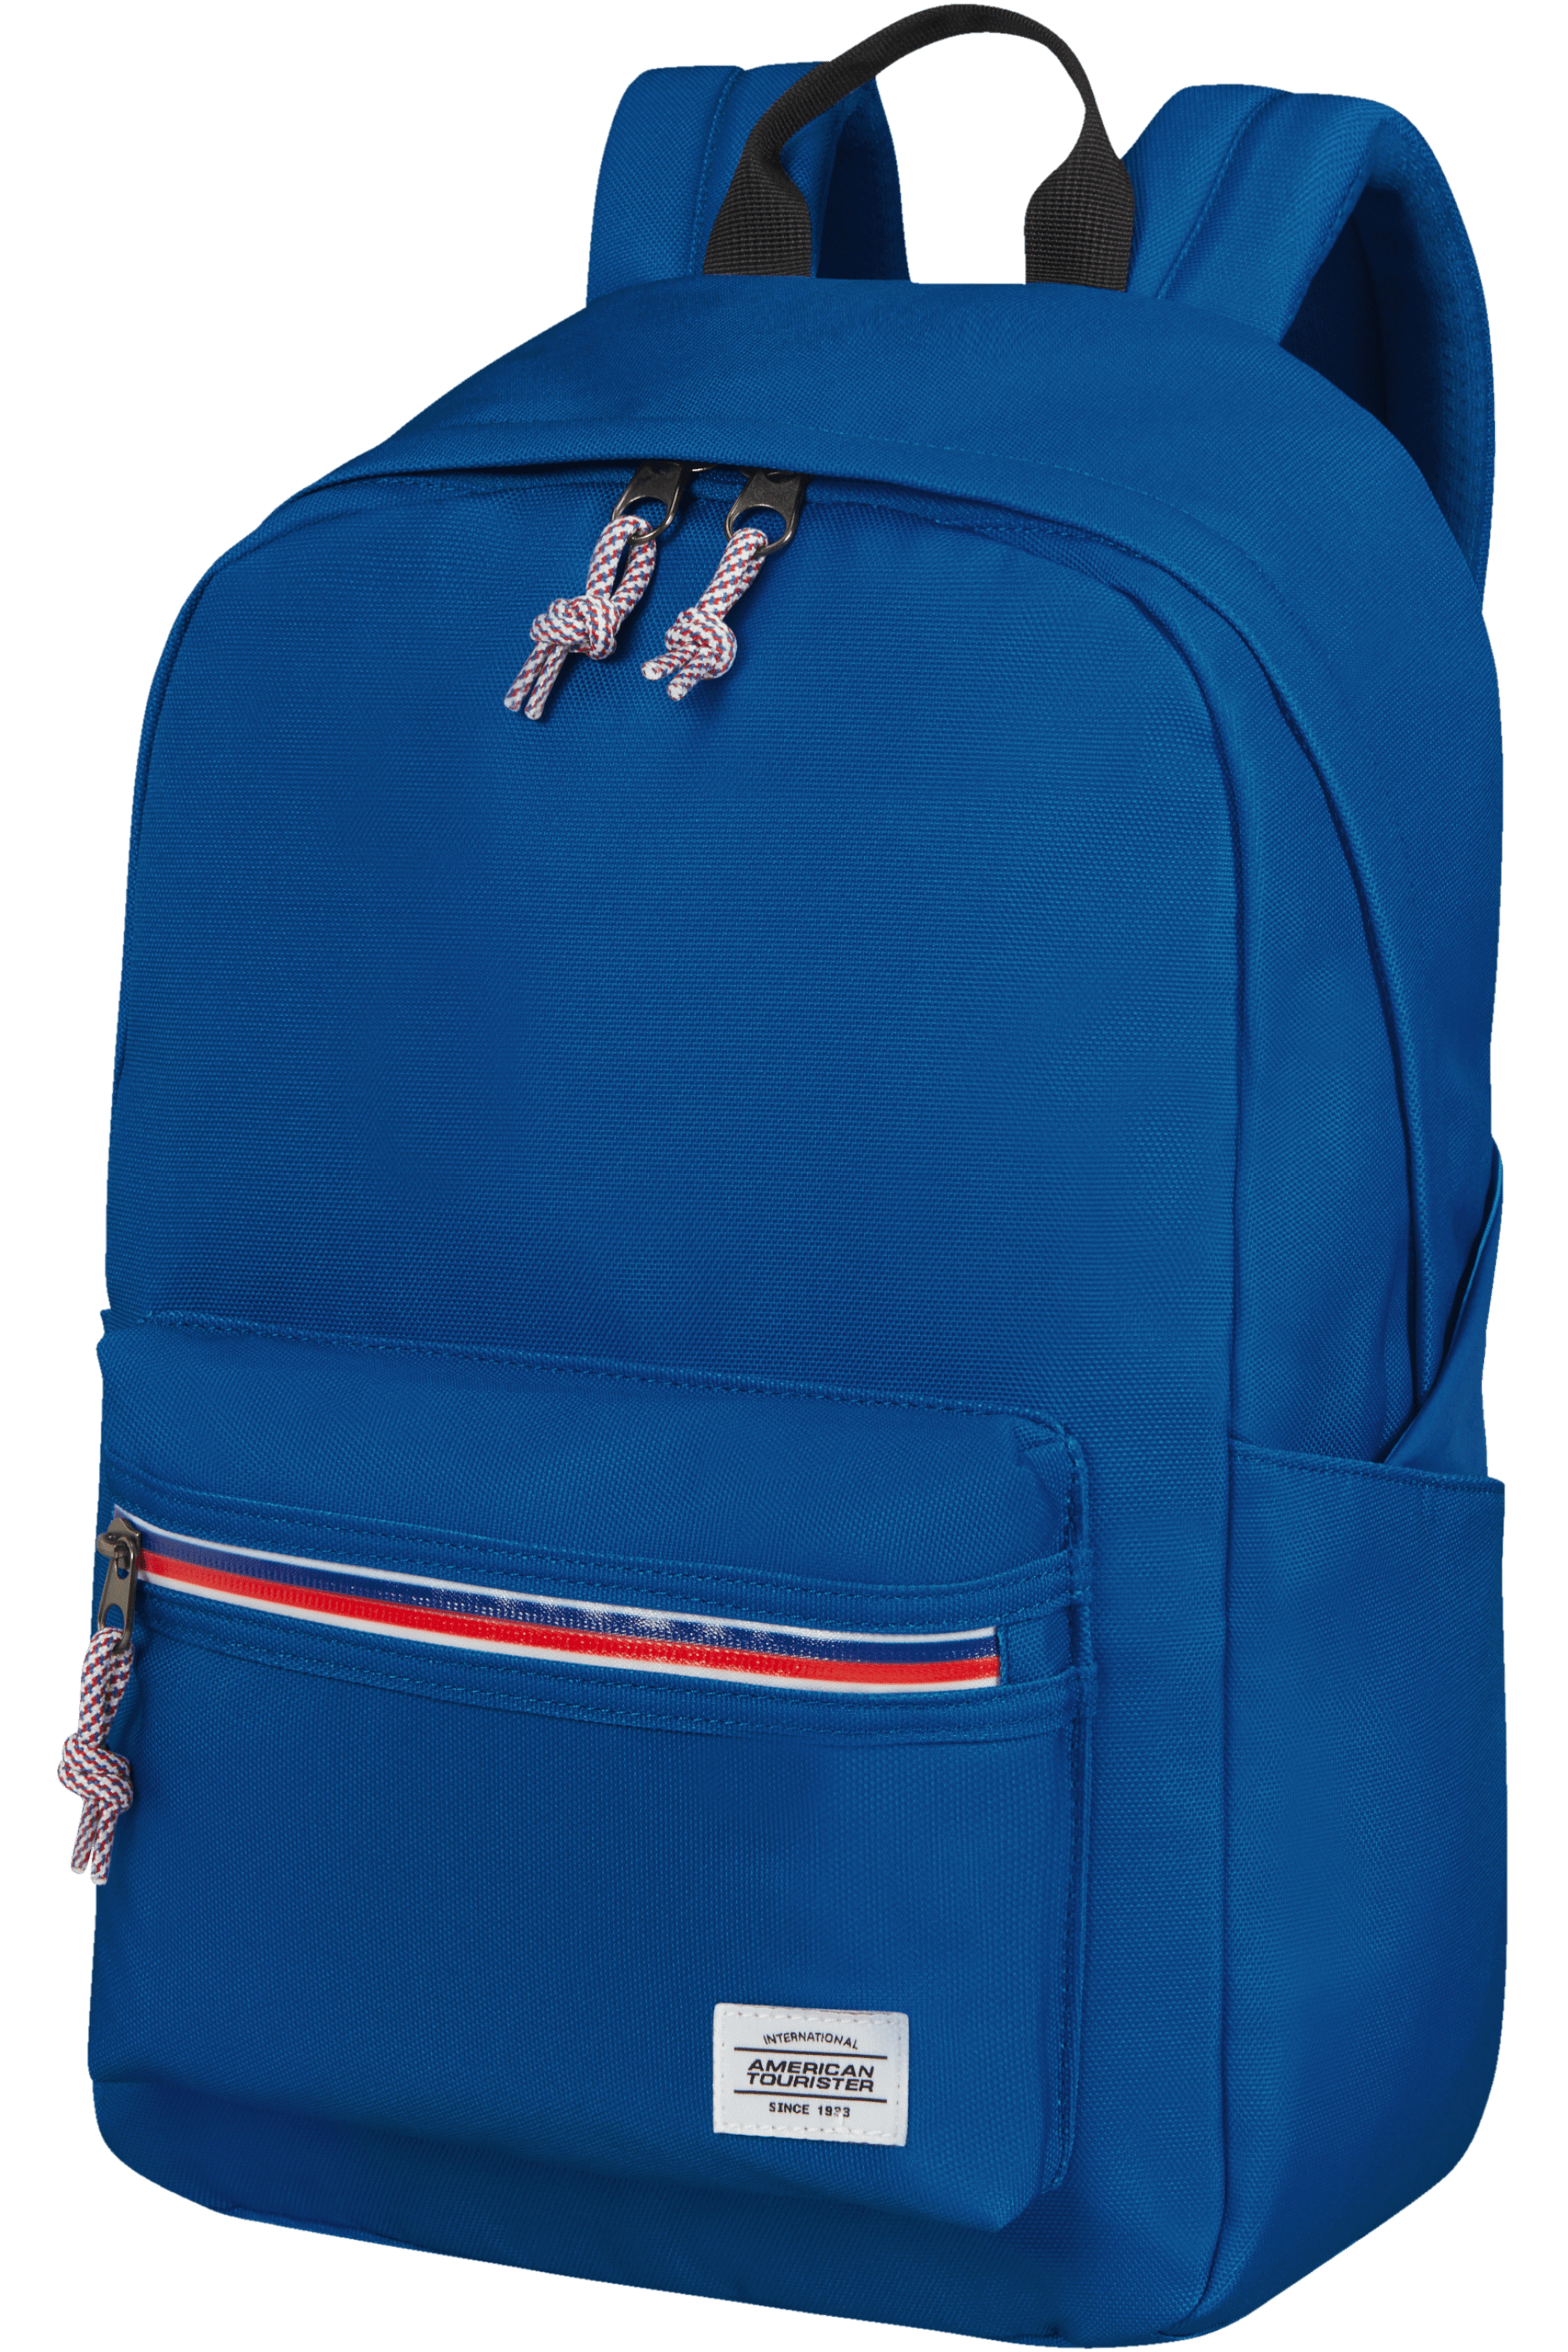 UpBeat Backpack | American Tourister UK